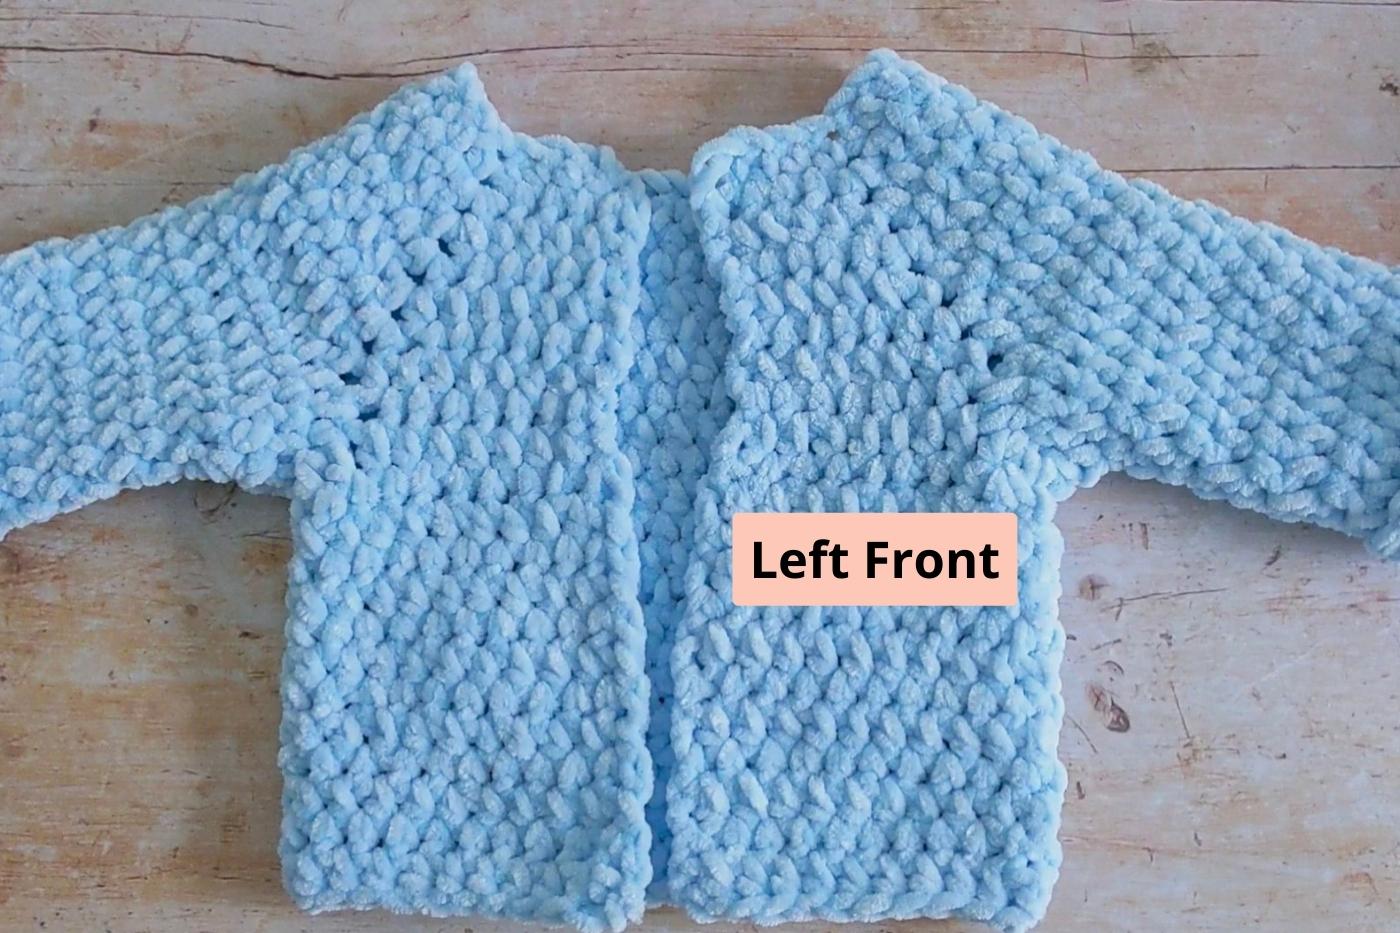 Position of Left Front on crochet baby hoodie